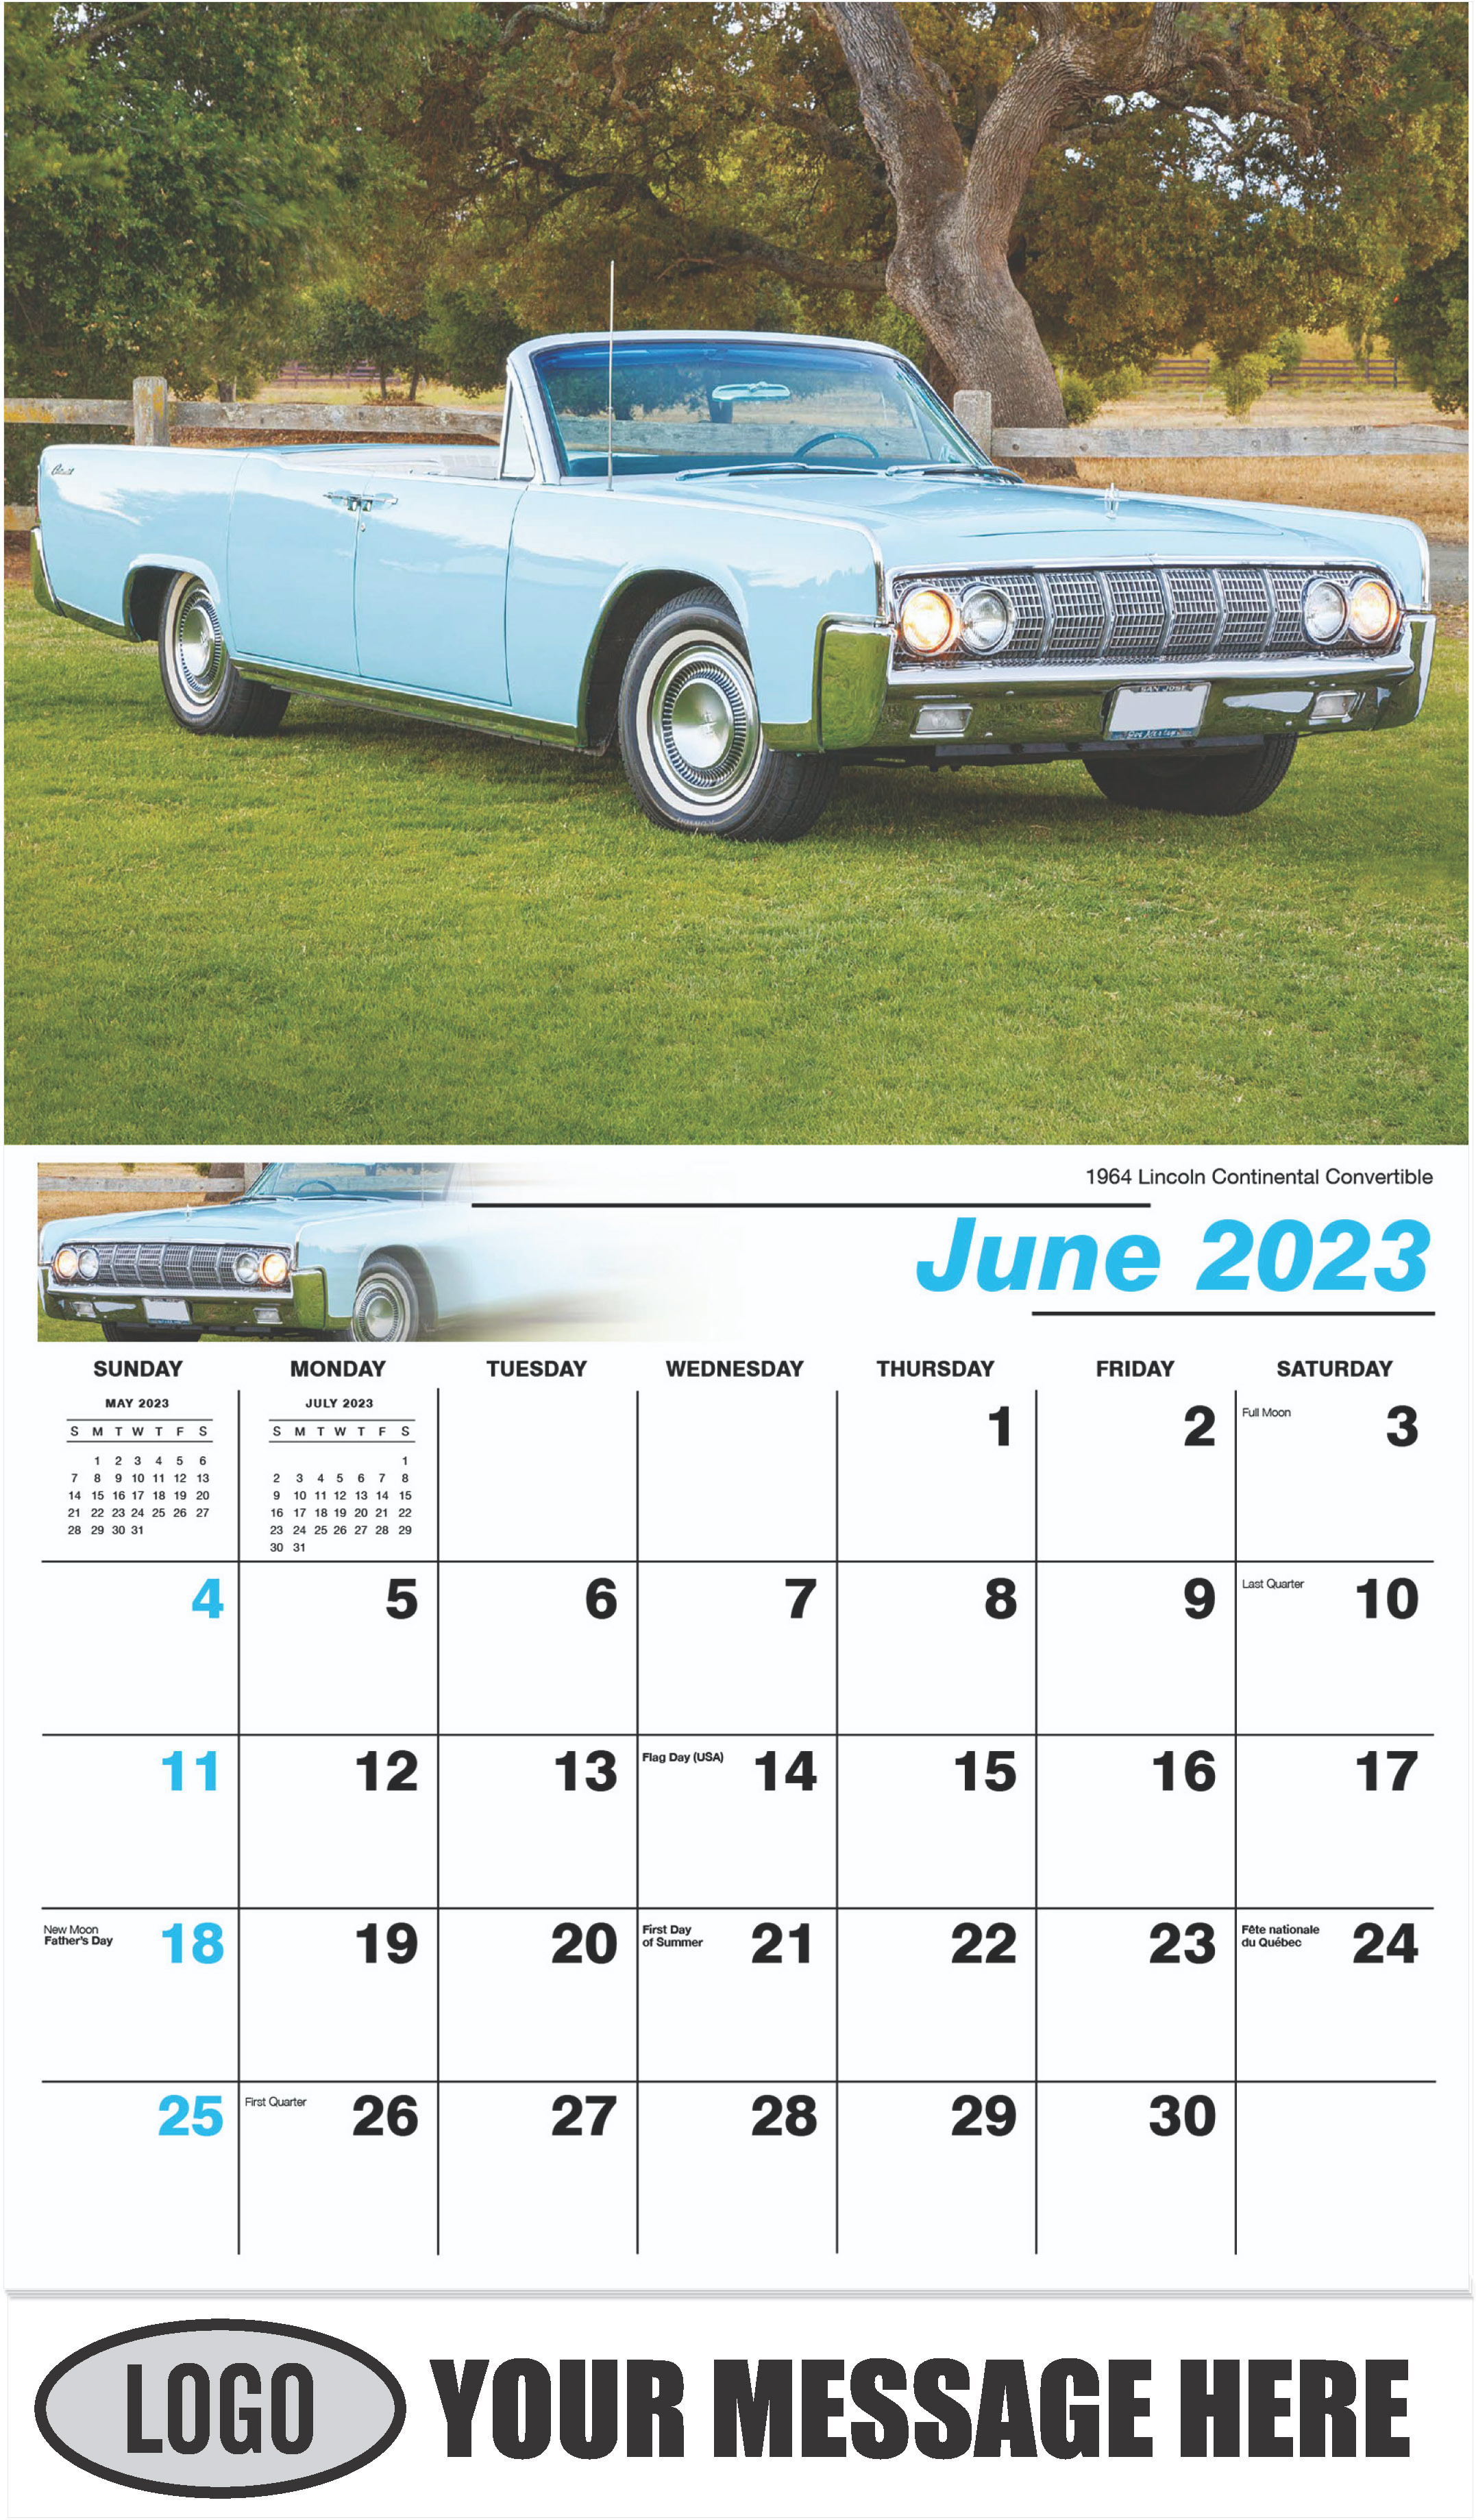 1964 Lincoln Continental Convertible - June - Henry's Heritage Ford Cars 2023 Promotional Calendar